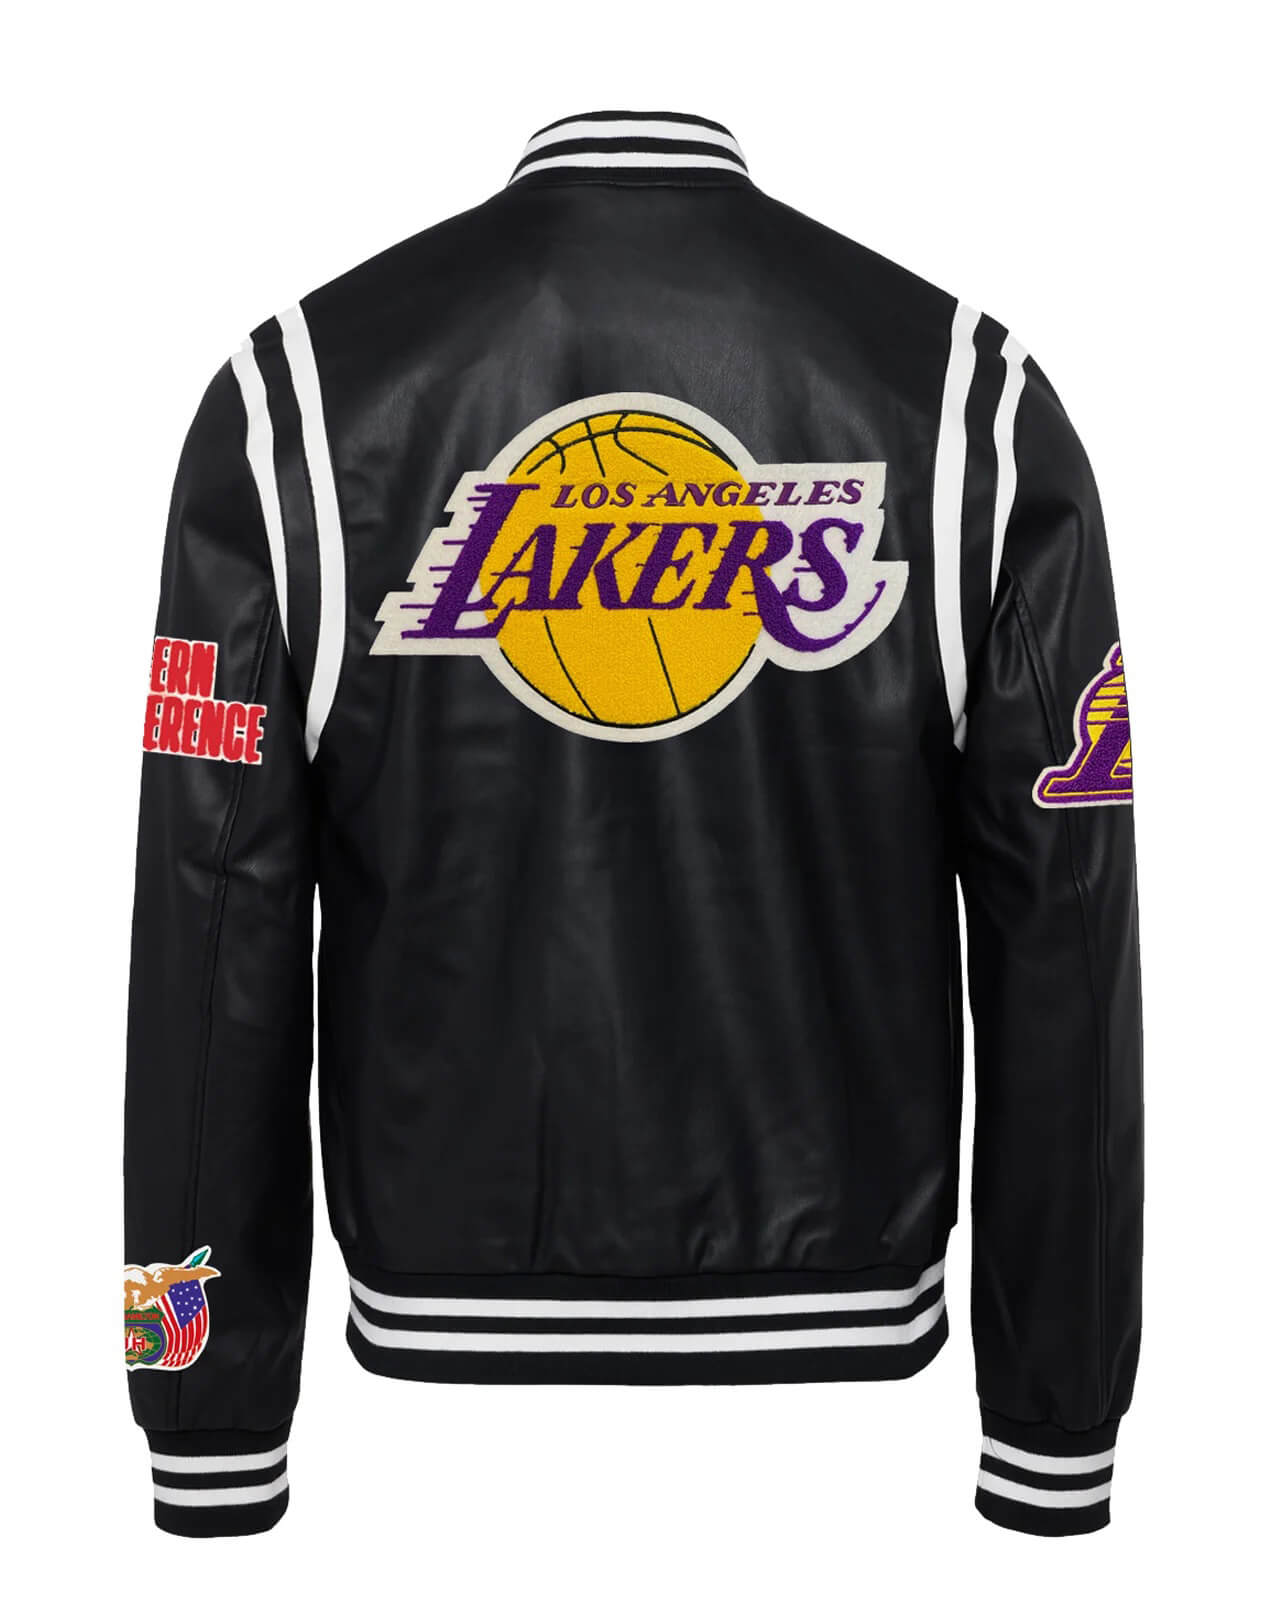 Buy Lakers Jacket Online In India -  India